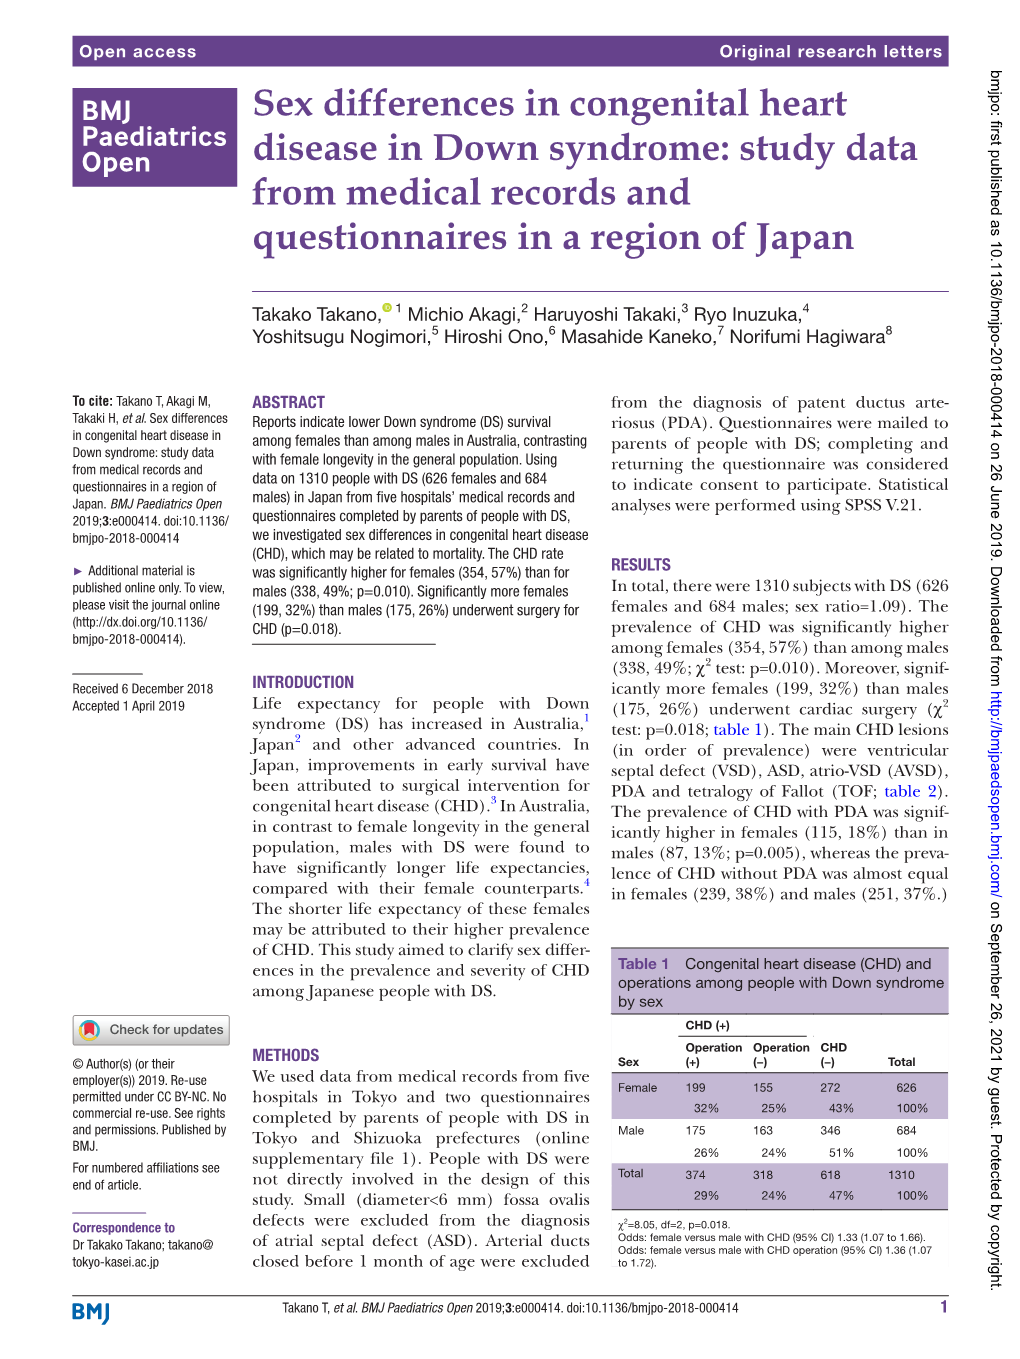 Sex Differences in Congenital Heart Disease in Down Syndrome: Study Data from Medical Records and Questionnaires in a Region of Japan